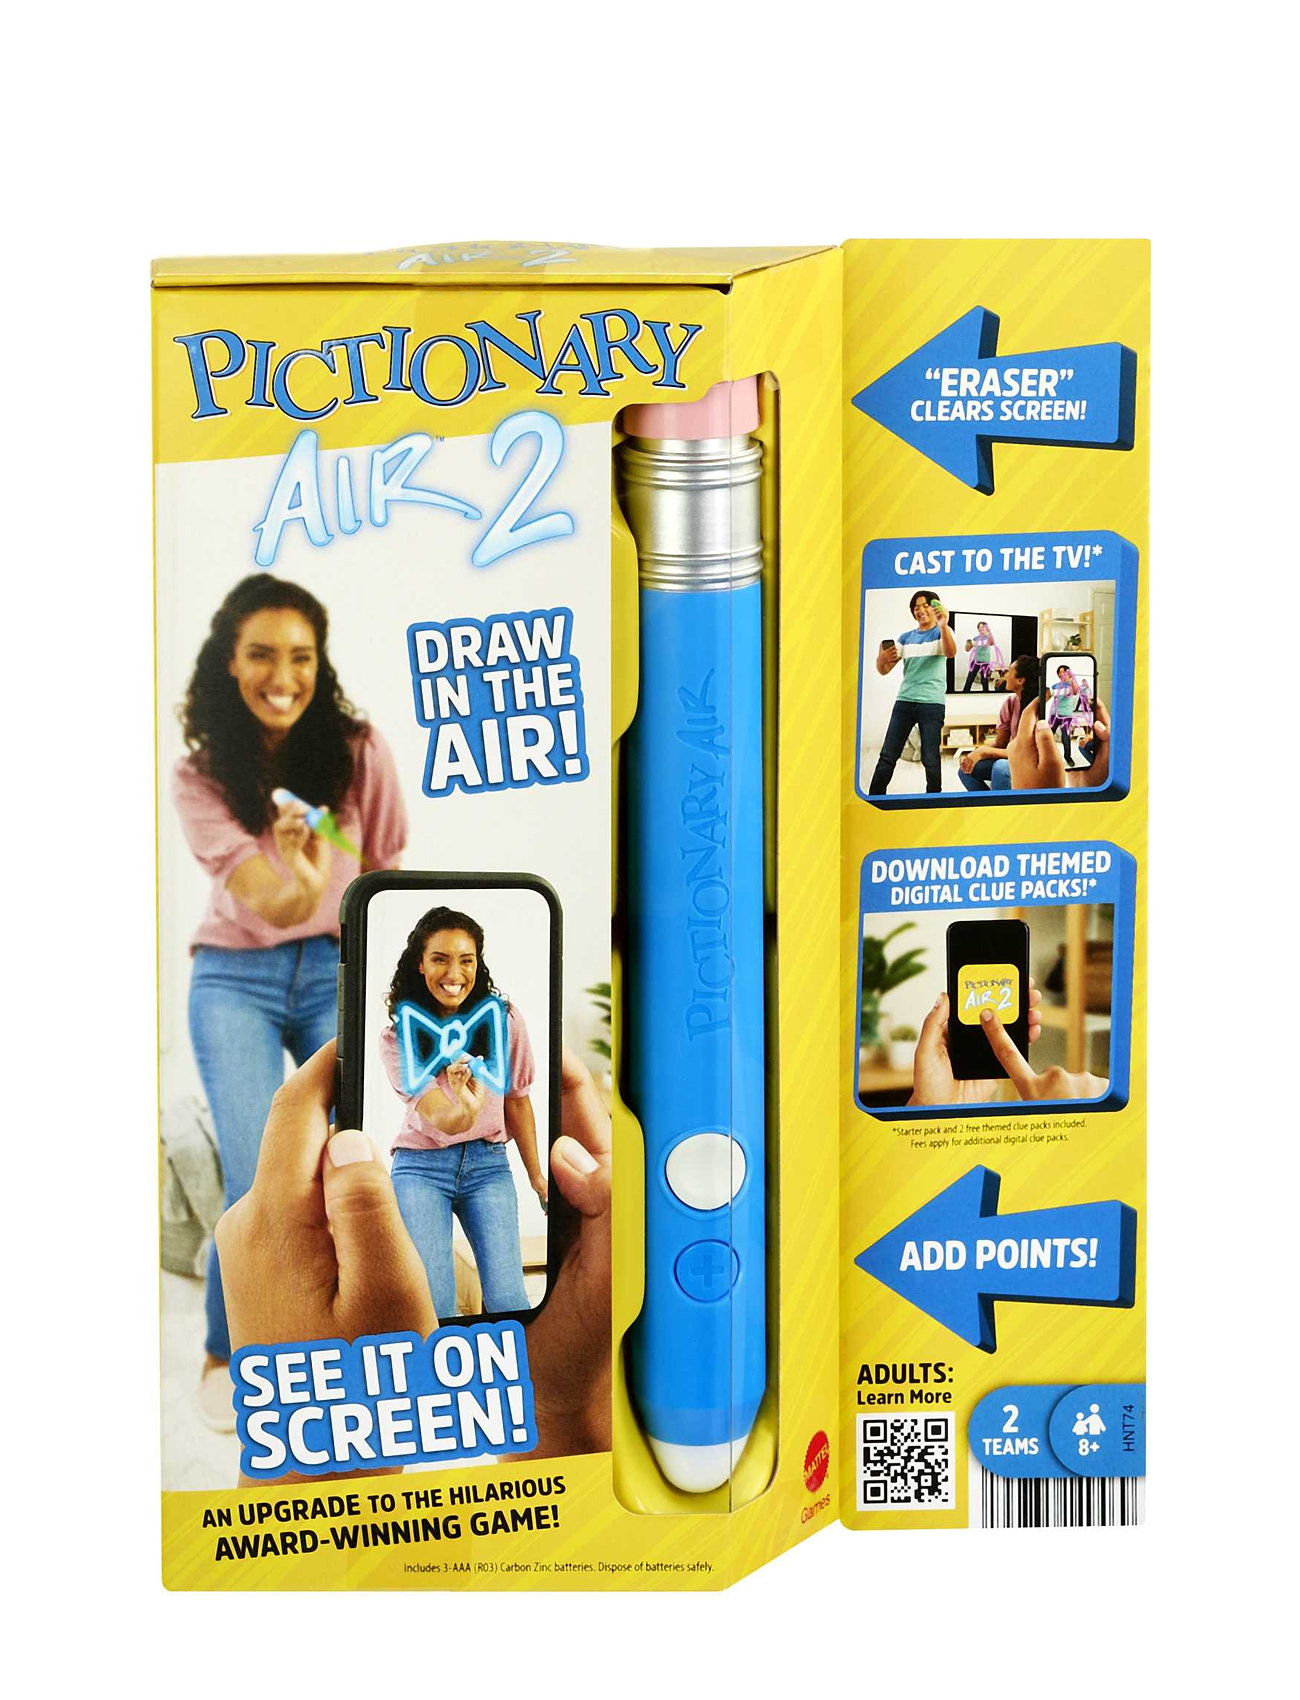 Games Pictionary Air 2 Toys Puzzles And Games Games Active Games Multi/patterned Mattel Games